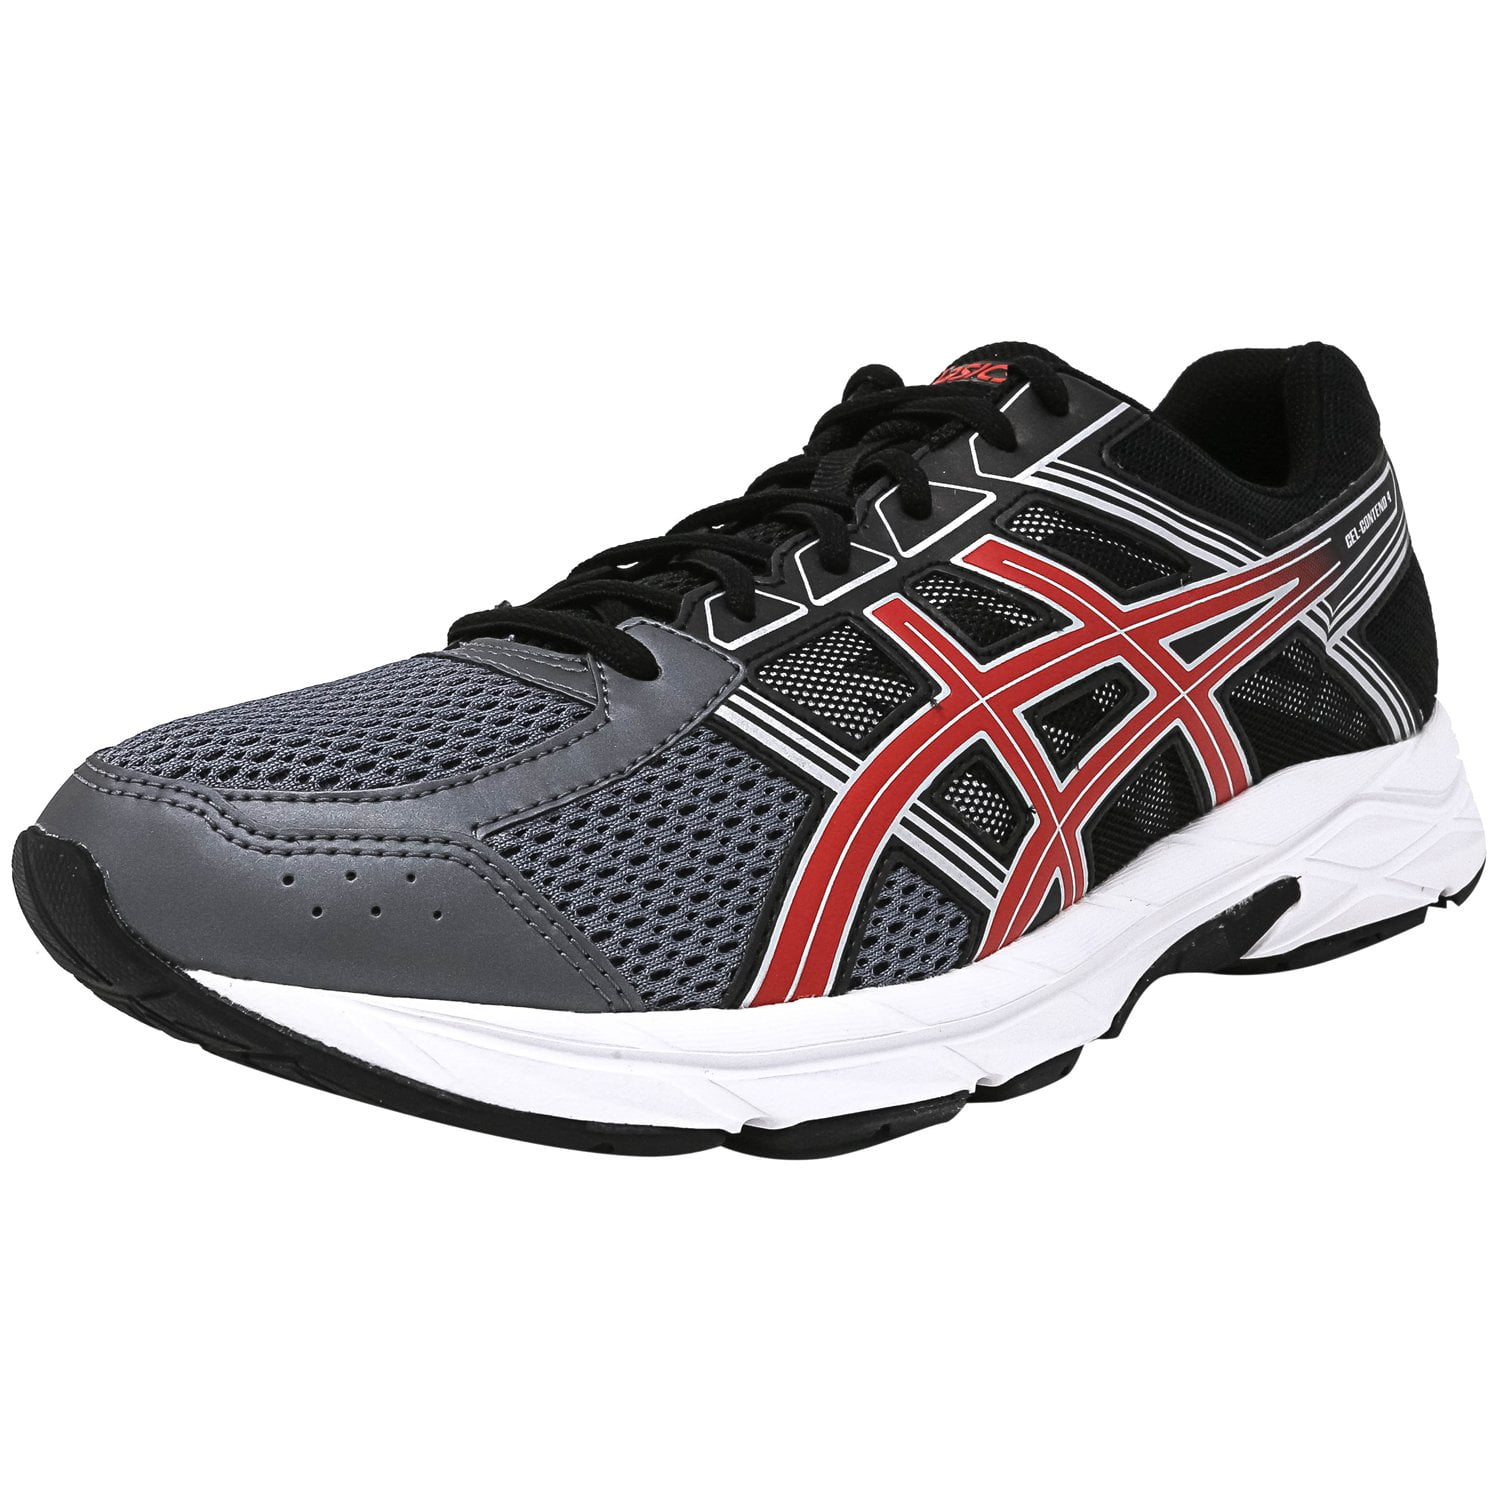 Do Asics Contend 4 Running Shoe Have Good Ankle Support?